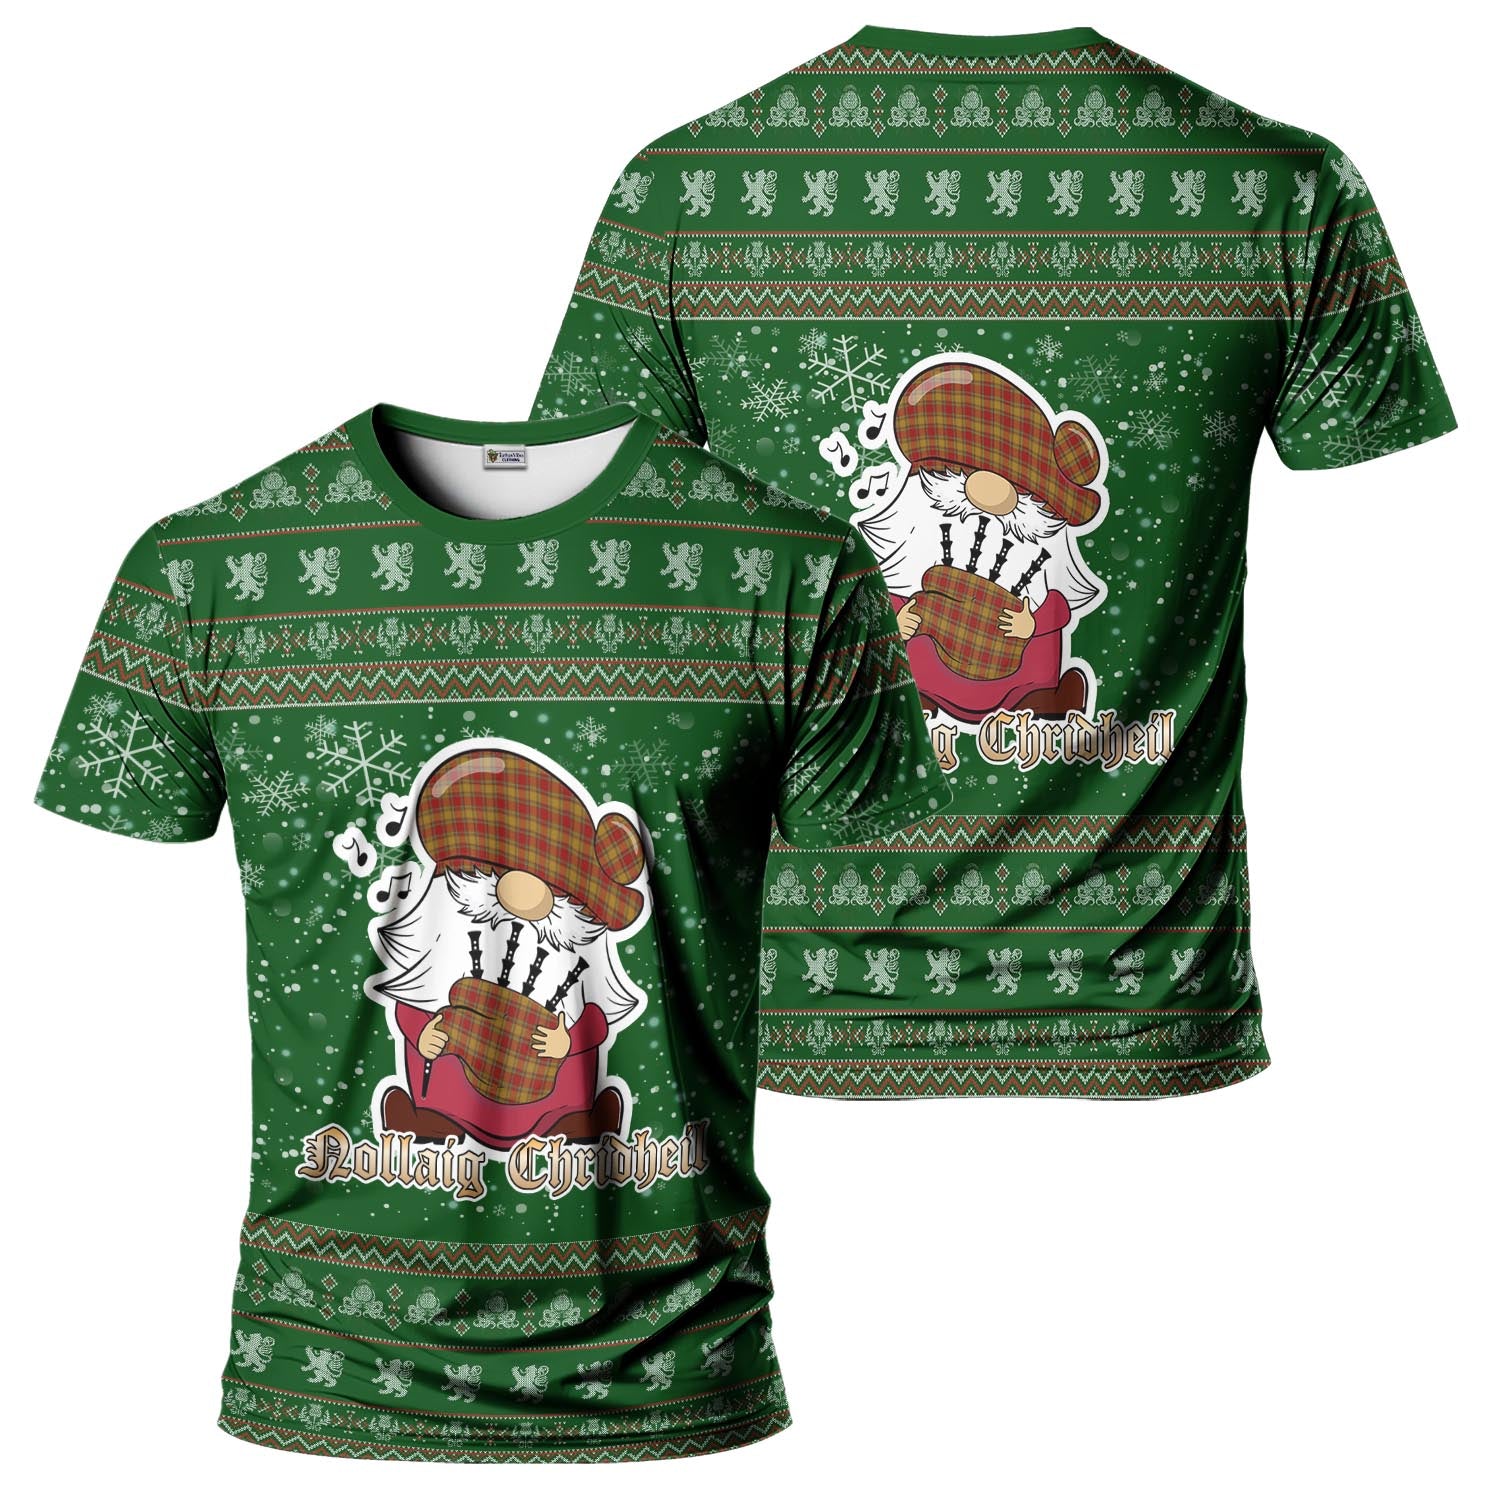 Scrymgeour Clan Christmas Family T-Shirt with Funny Gnome Playing Bagpipes Men's Shirt Green - Tartanvibesclothing